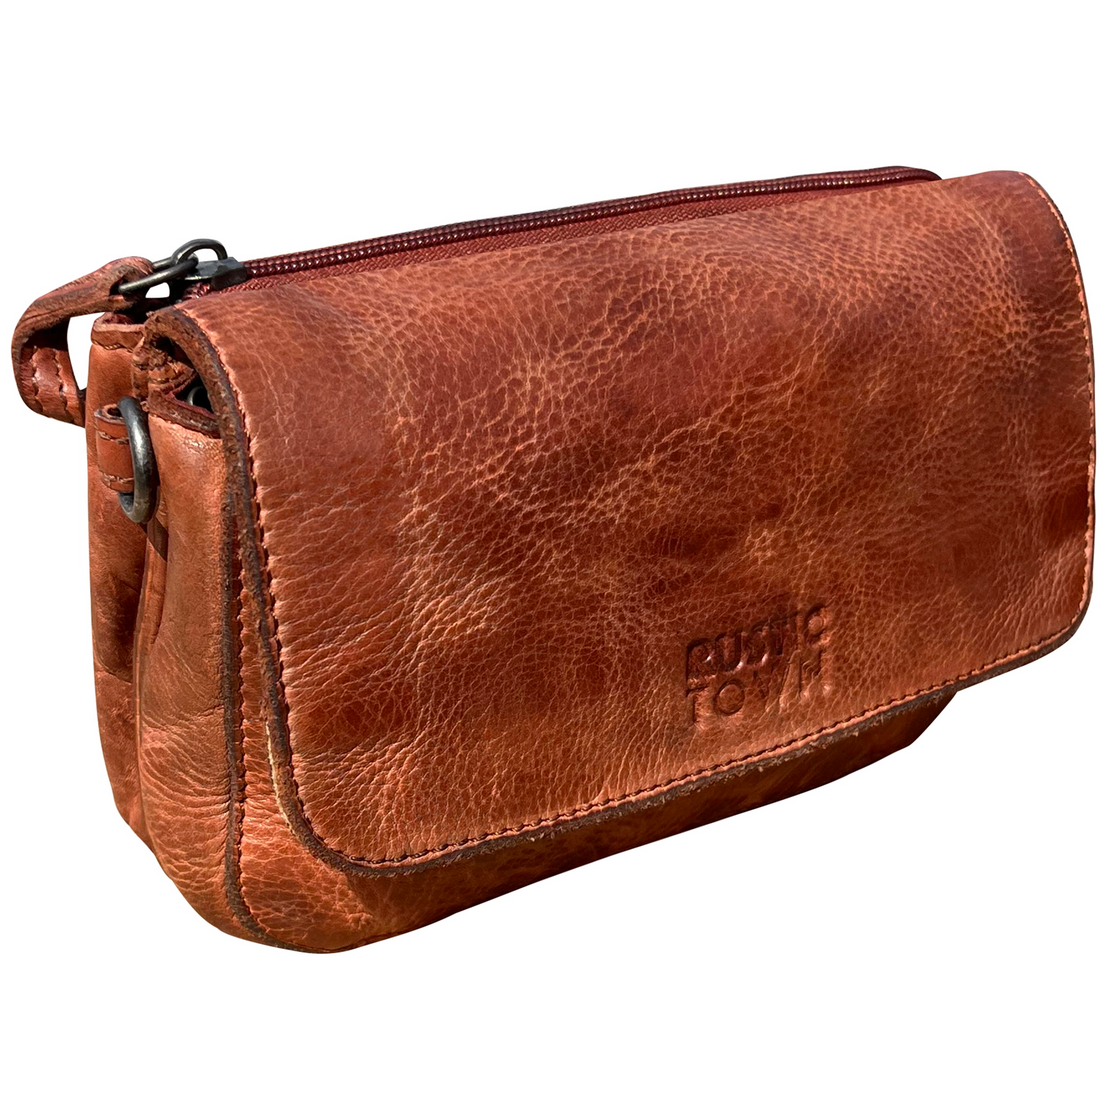 Leather Hand Pouch Men Purse Wallet Clutch Wrist Bag – Rustic Town India